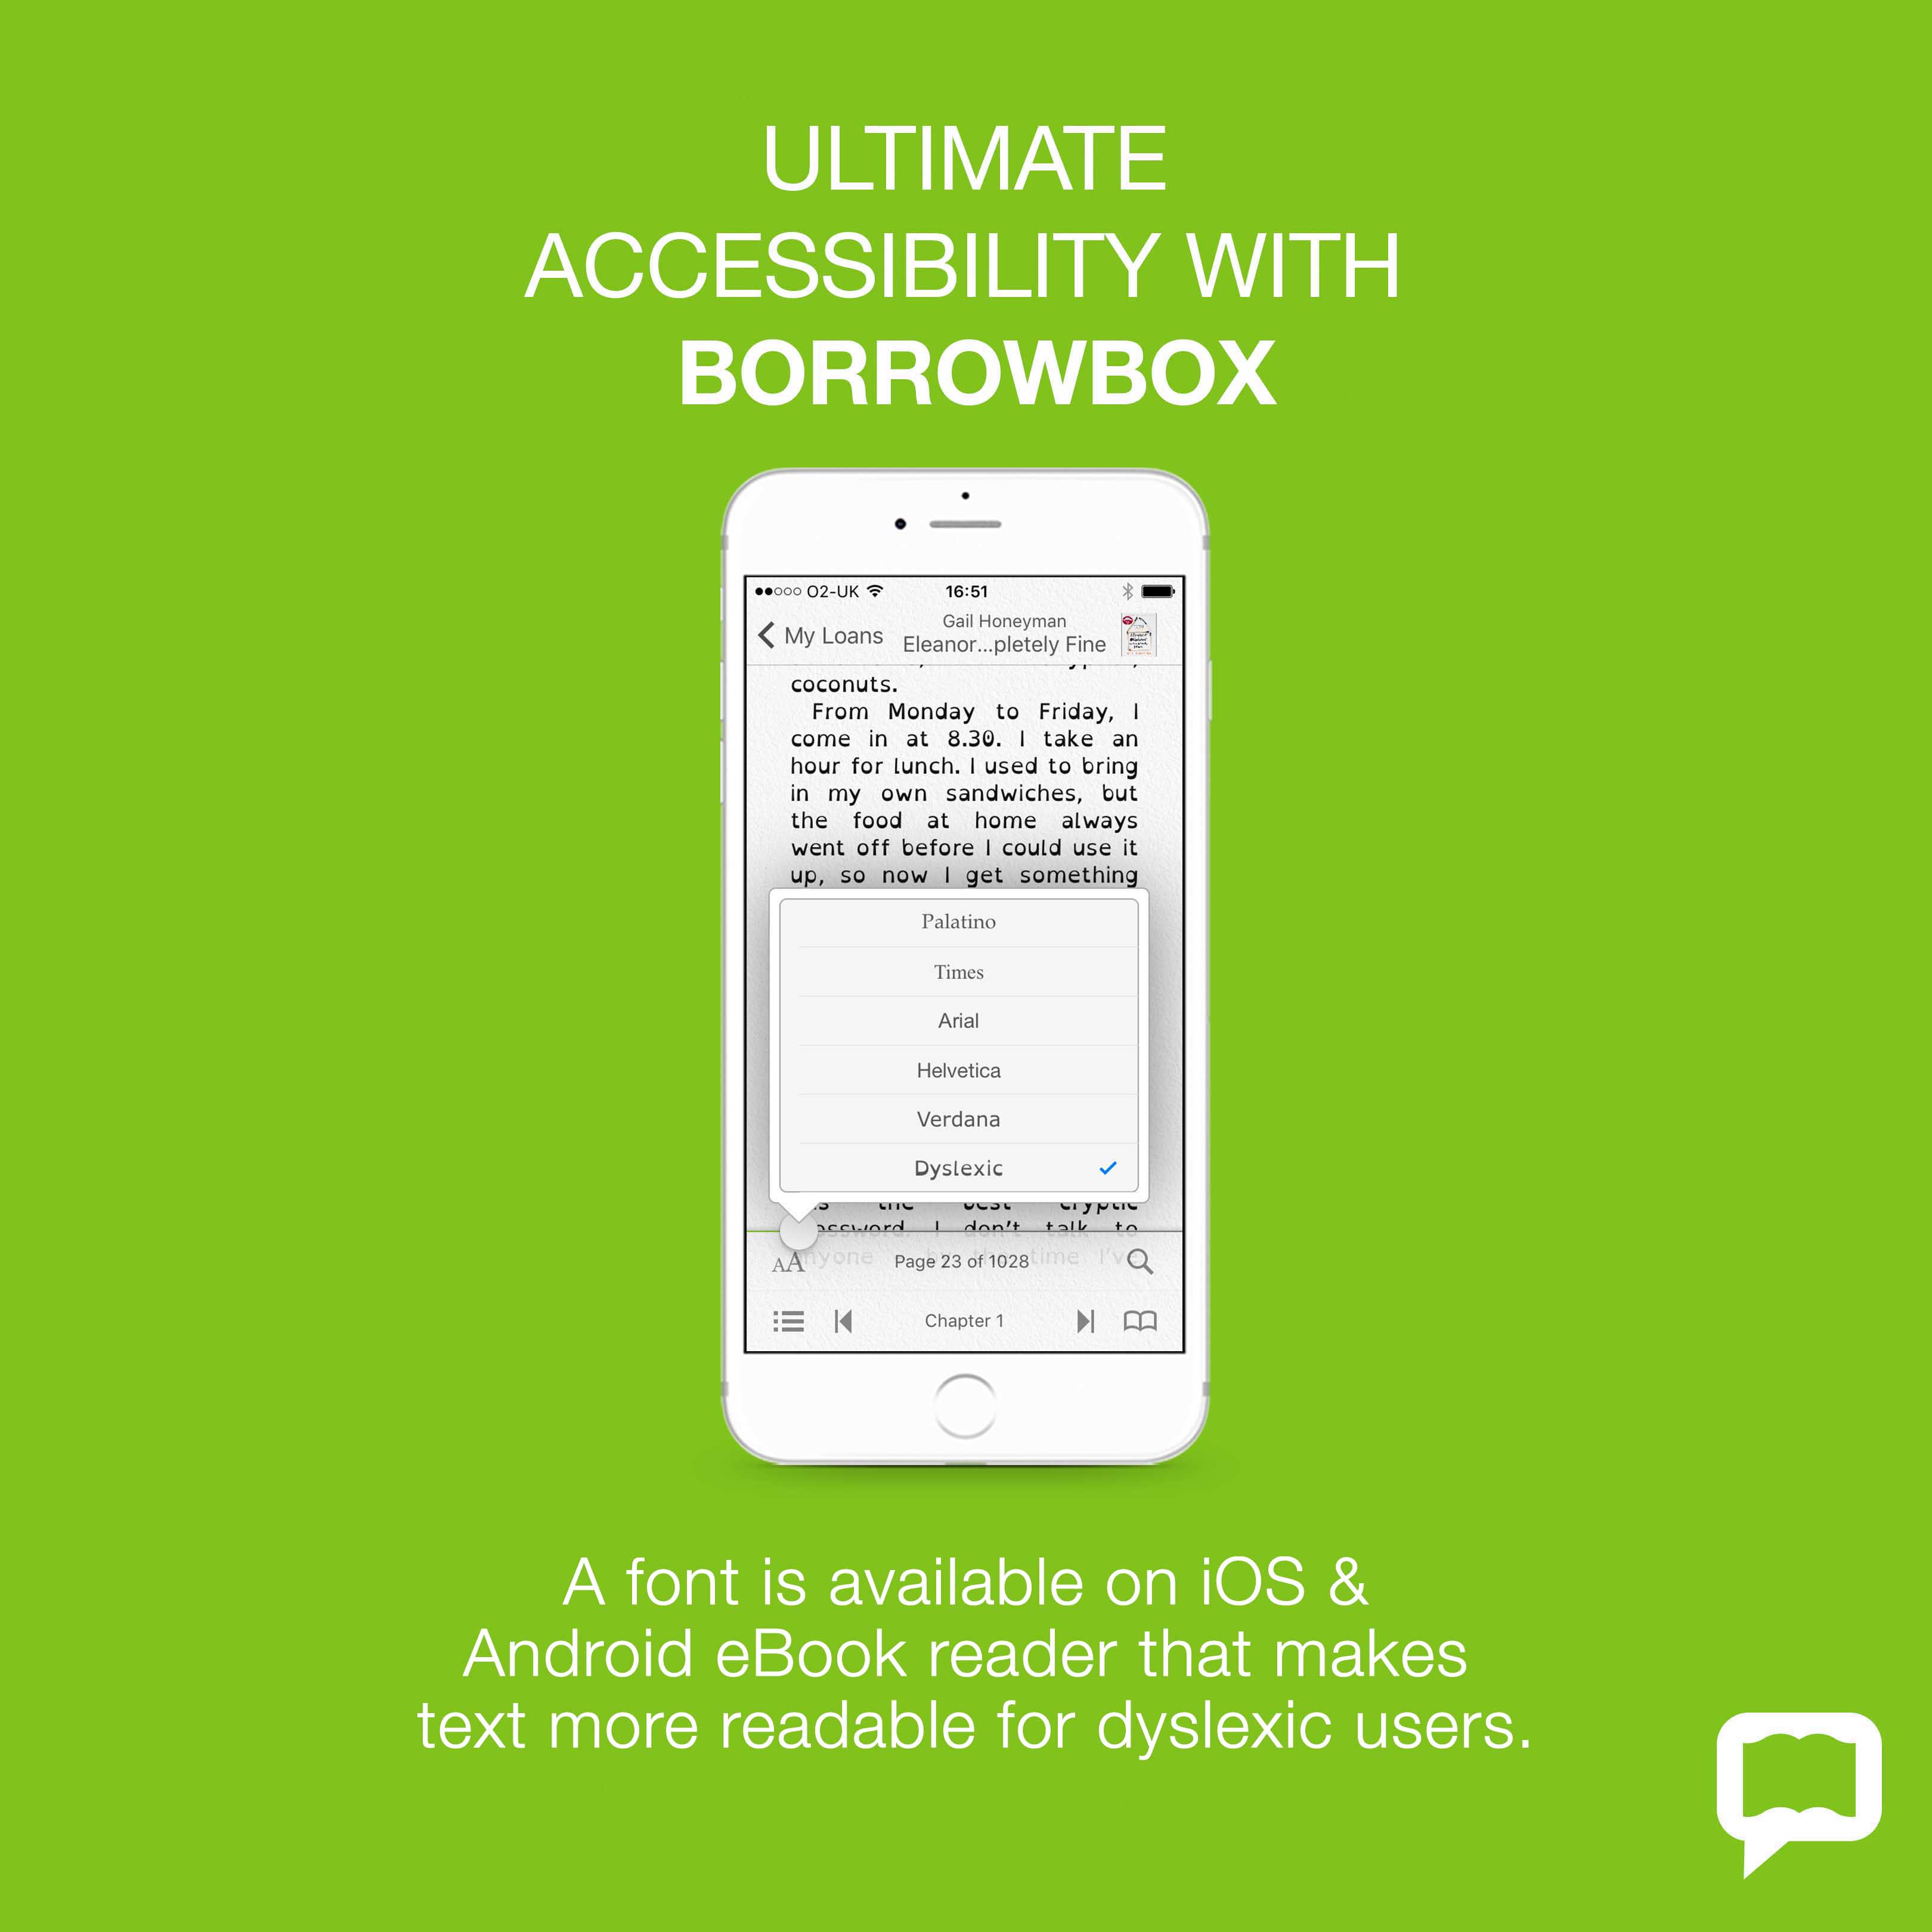 BorrowBox Accessibility - A font is available suitable for Dyslexic readers